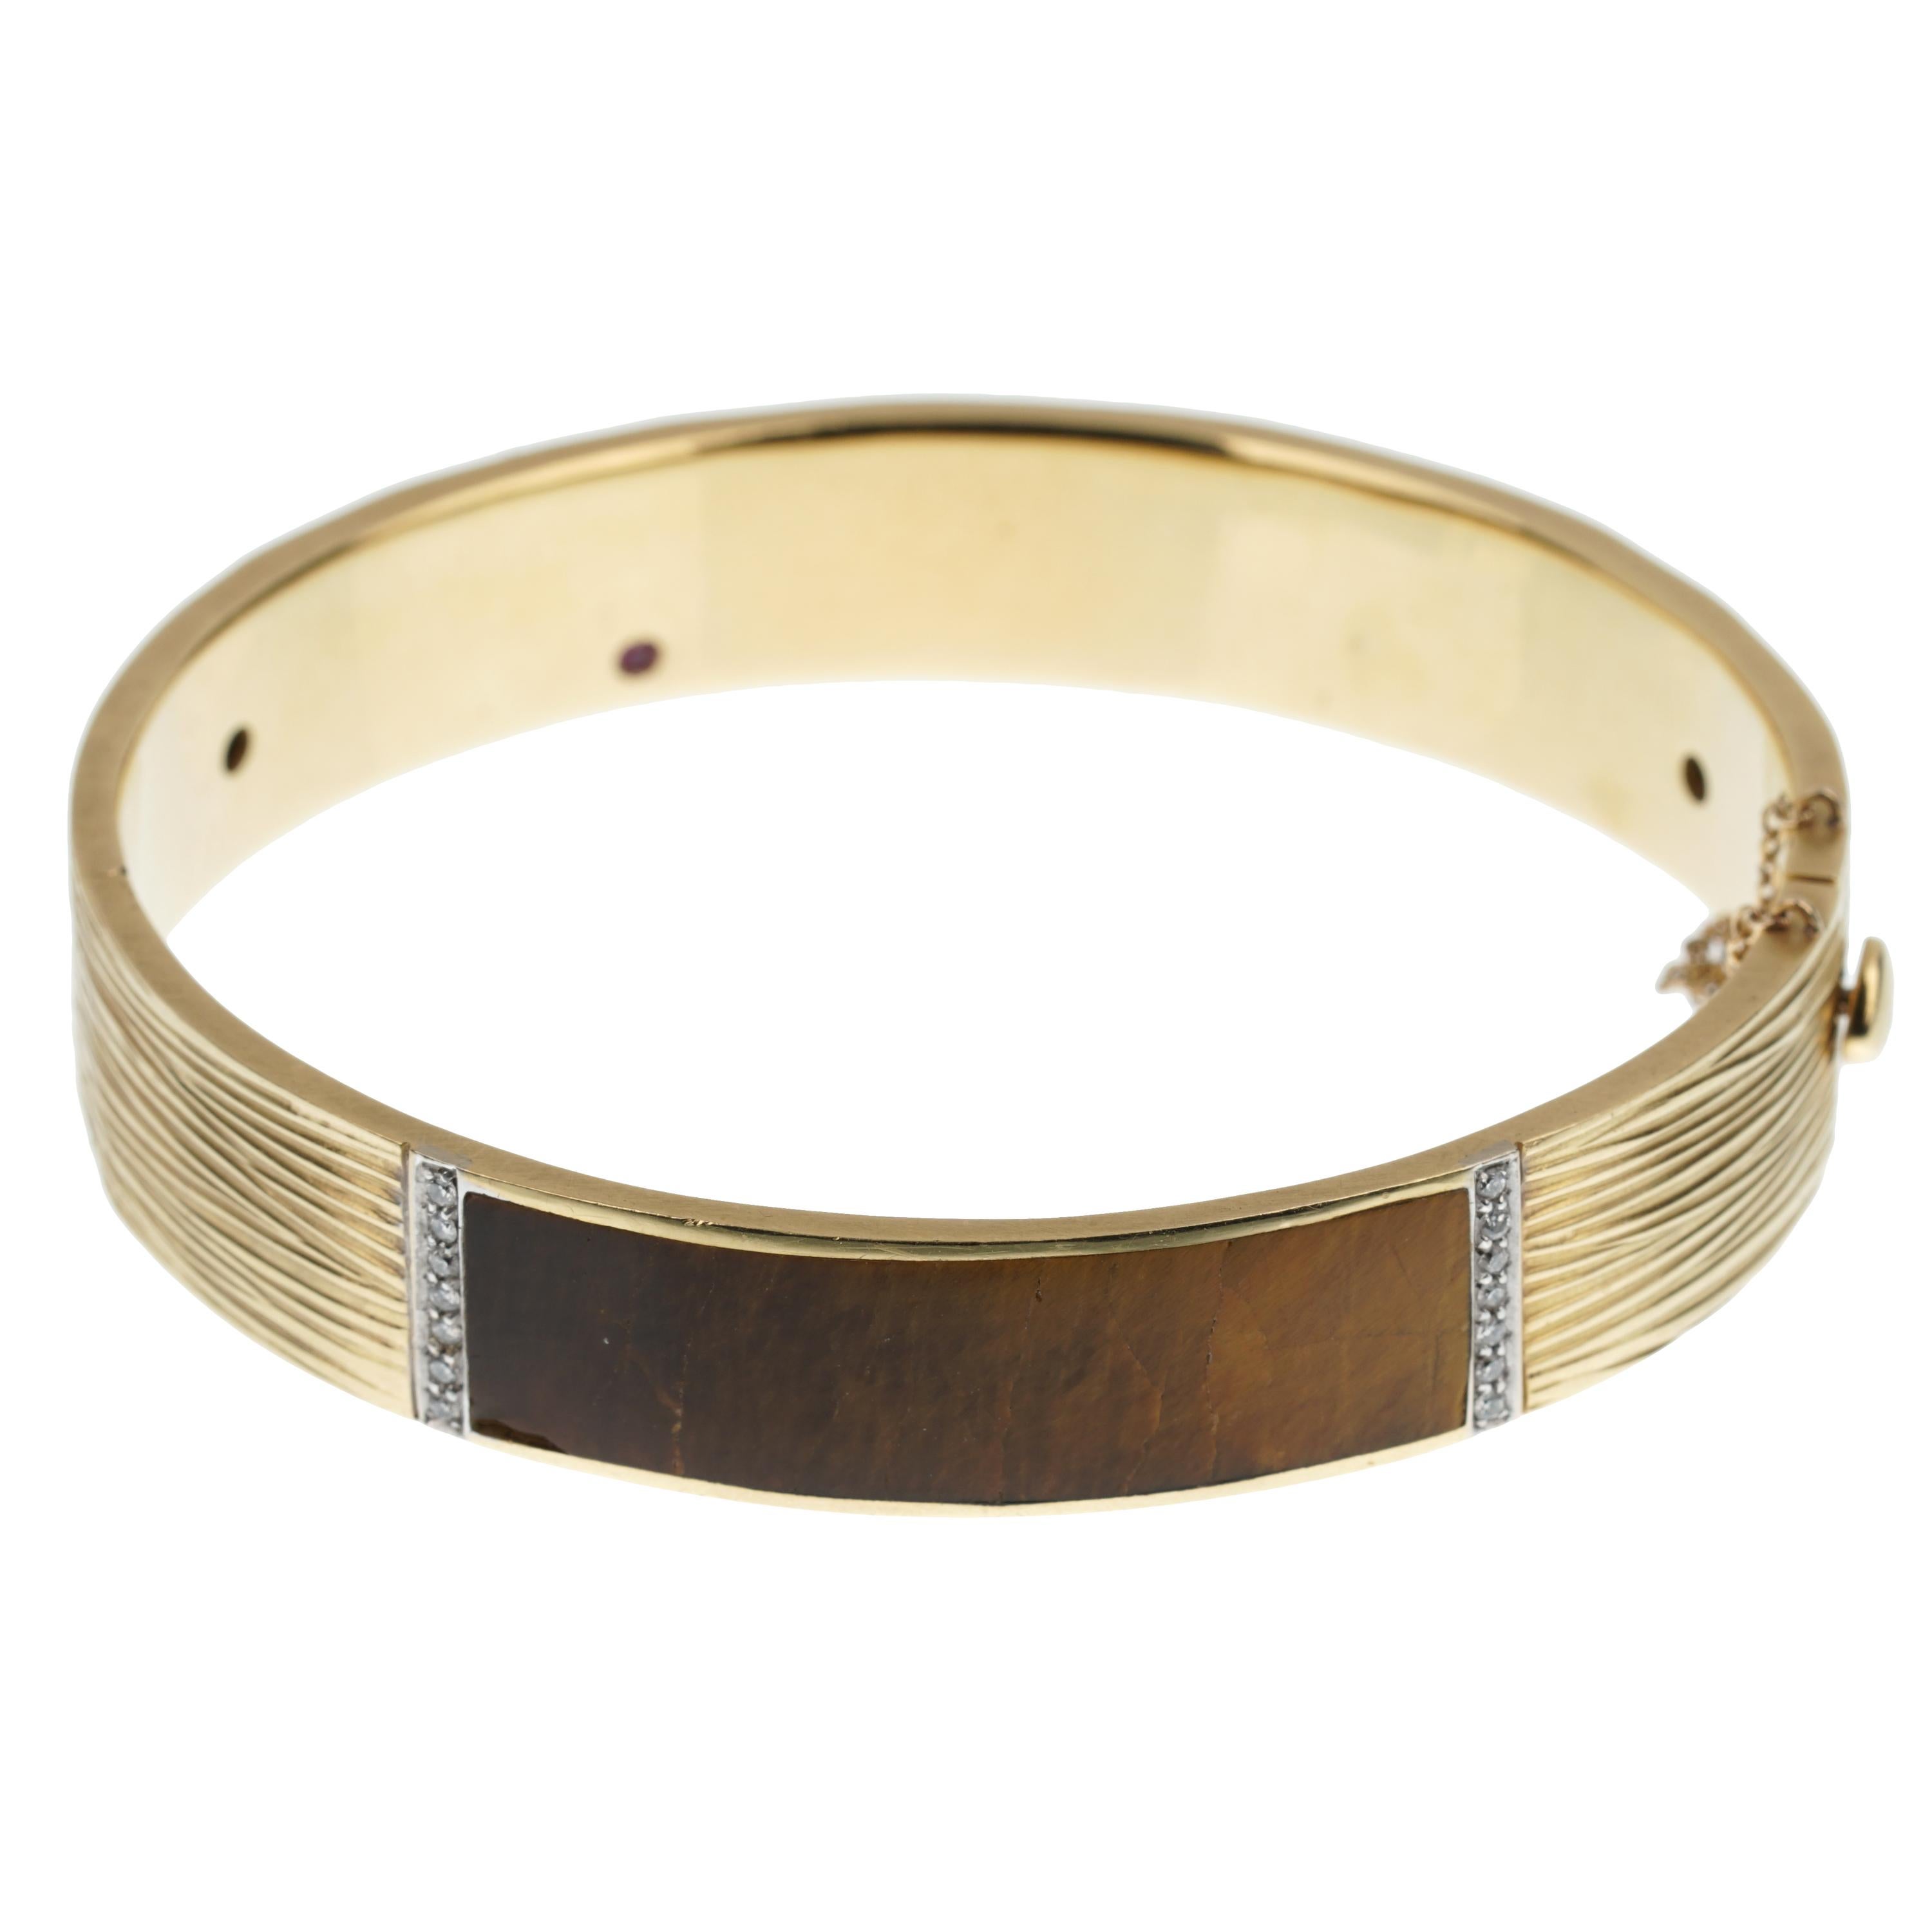 Envision a Roberto Coin Tiger Eye Vintage Diamond Bangle Bracelet that embodies the fusion of nature's allure with the sophistication of fine craftsmanship. This exquisite piece of jewelry marries the rustic beauty of Tiger Eye with the timeless